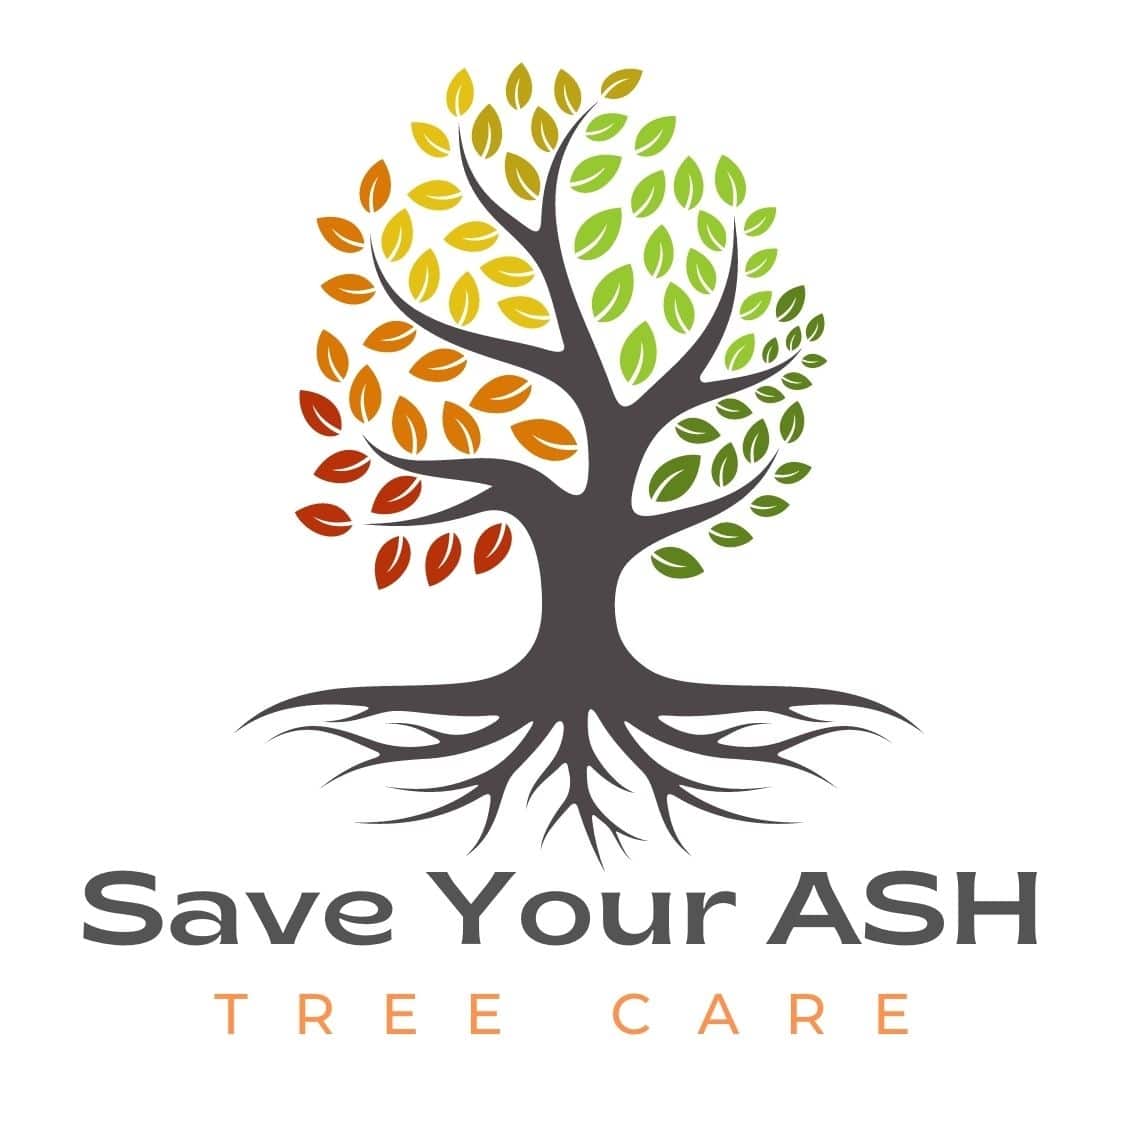 Save Your ASH Tree Care